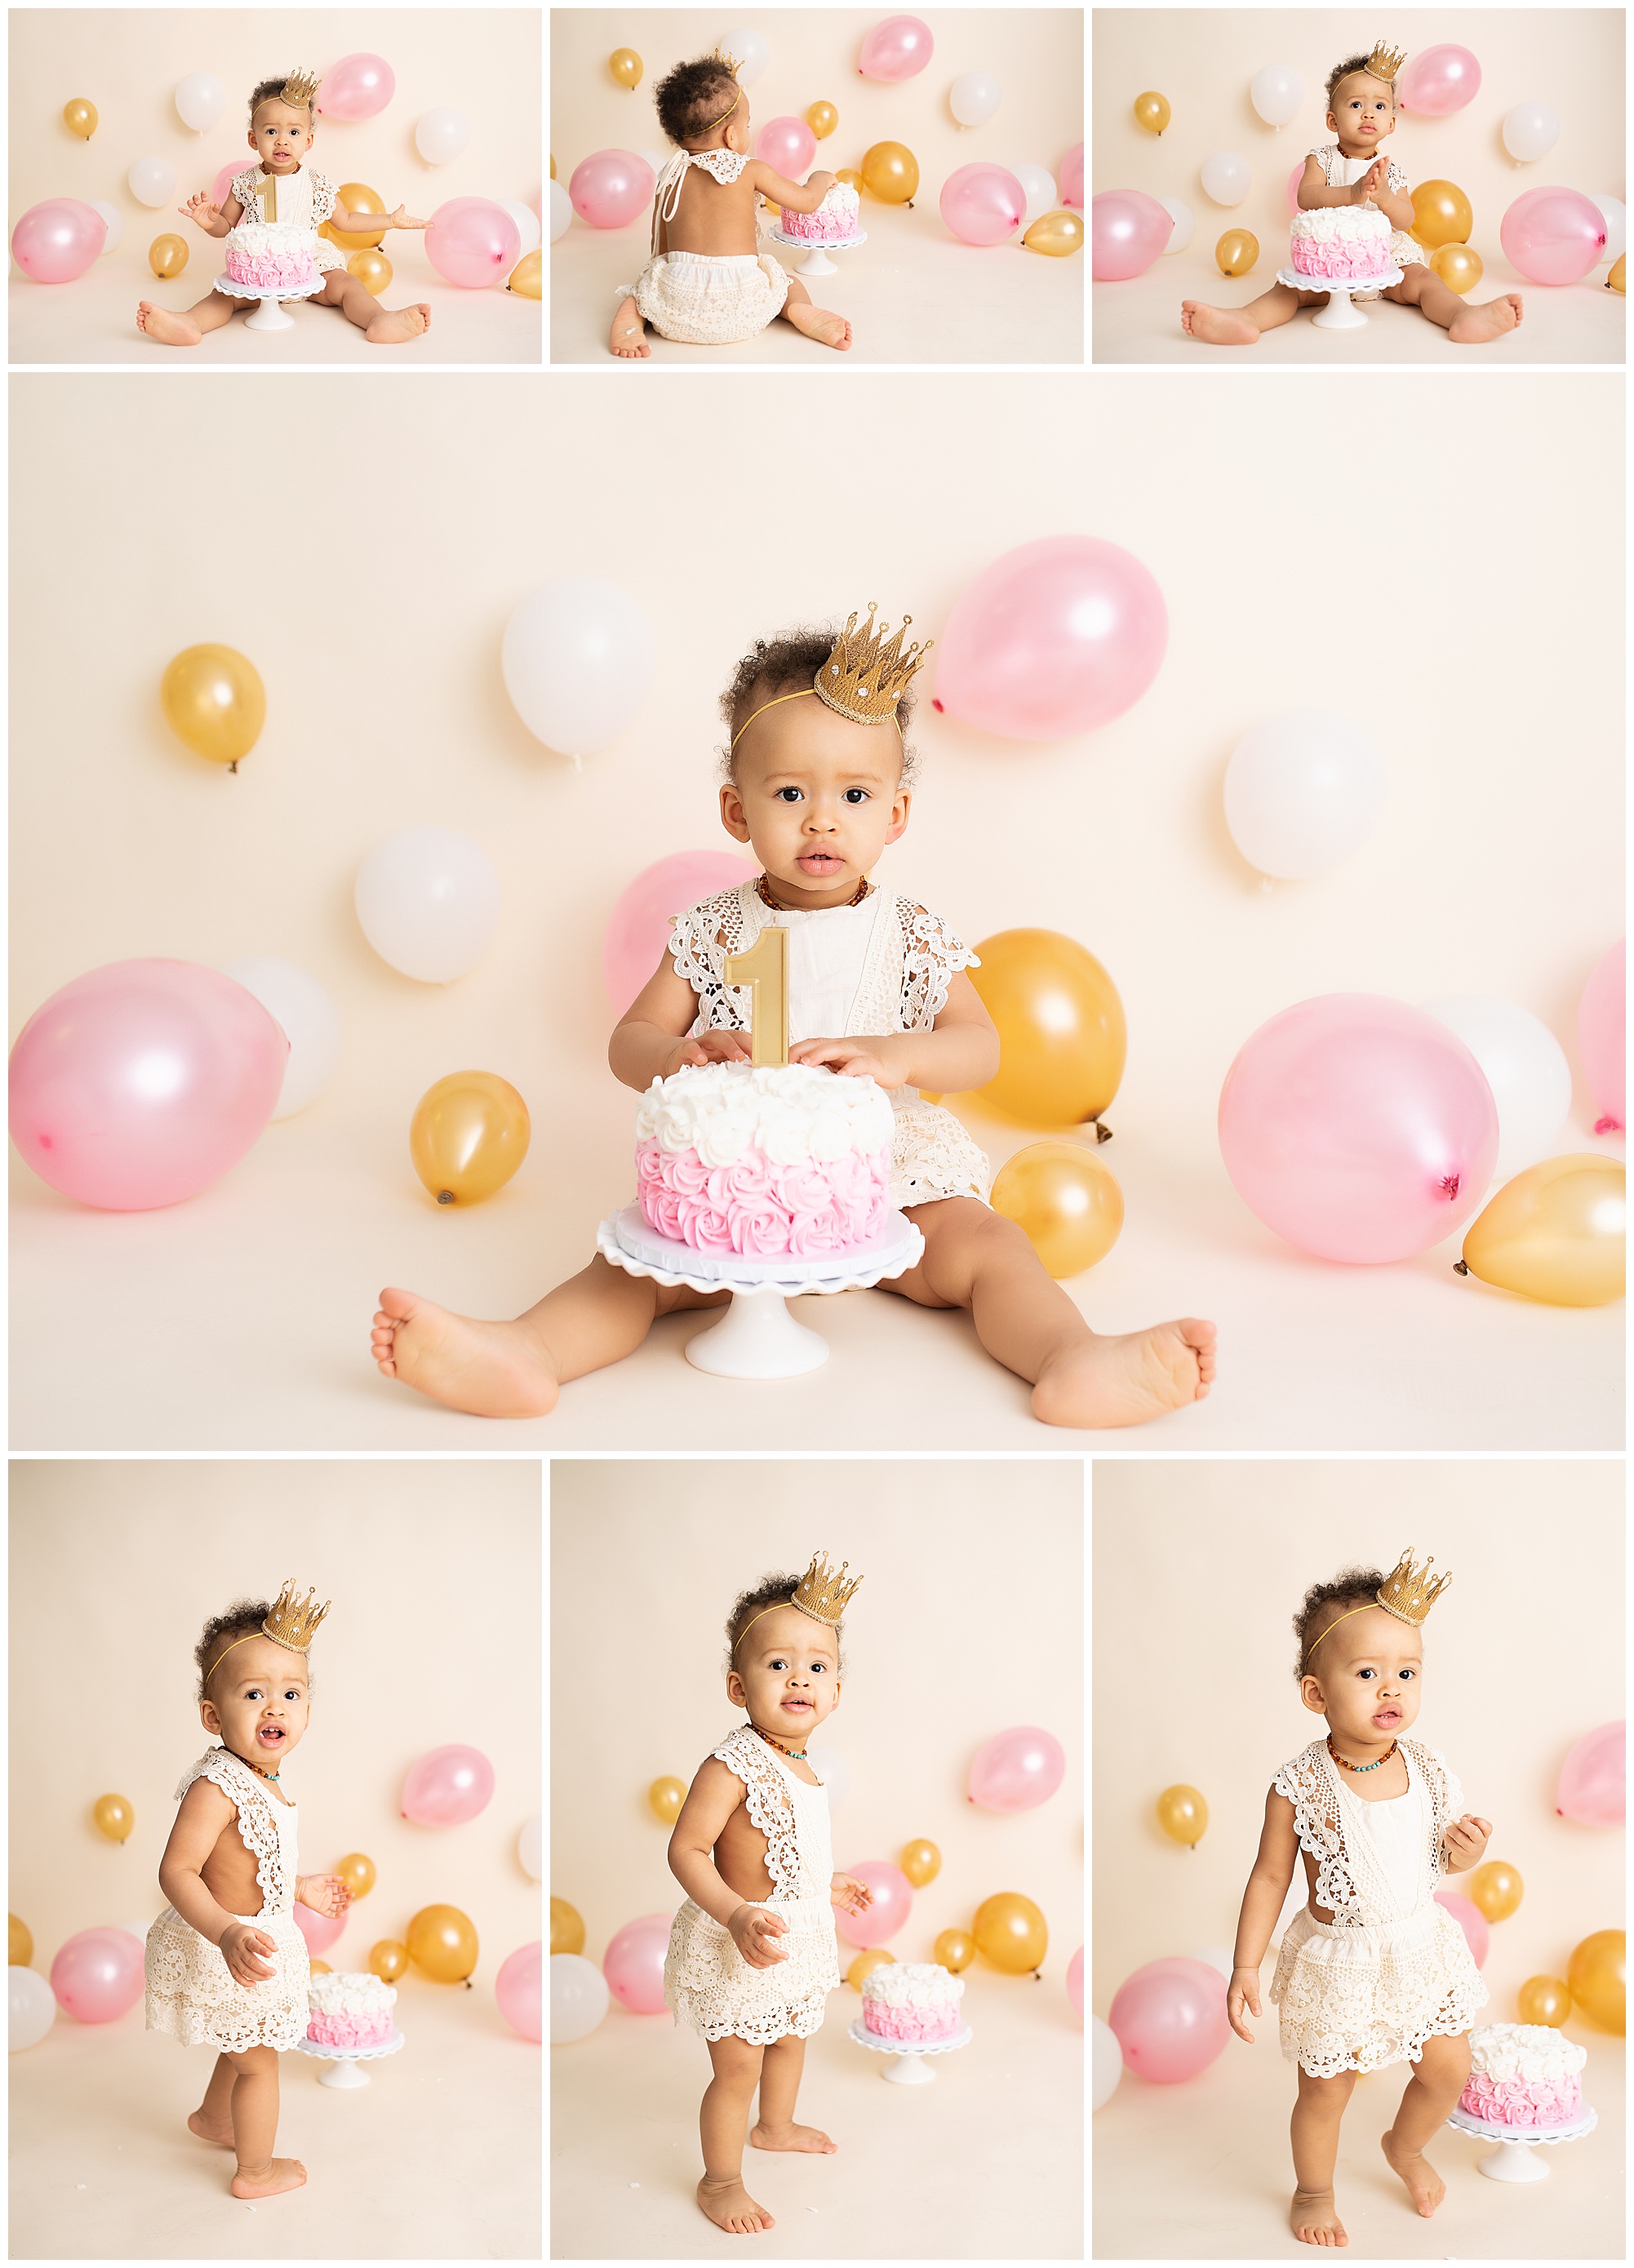 birthday girl playing with her pink cake in the photography studio